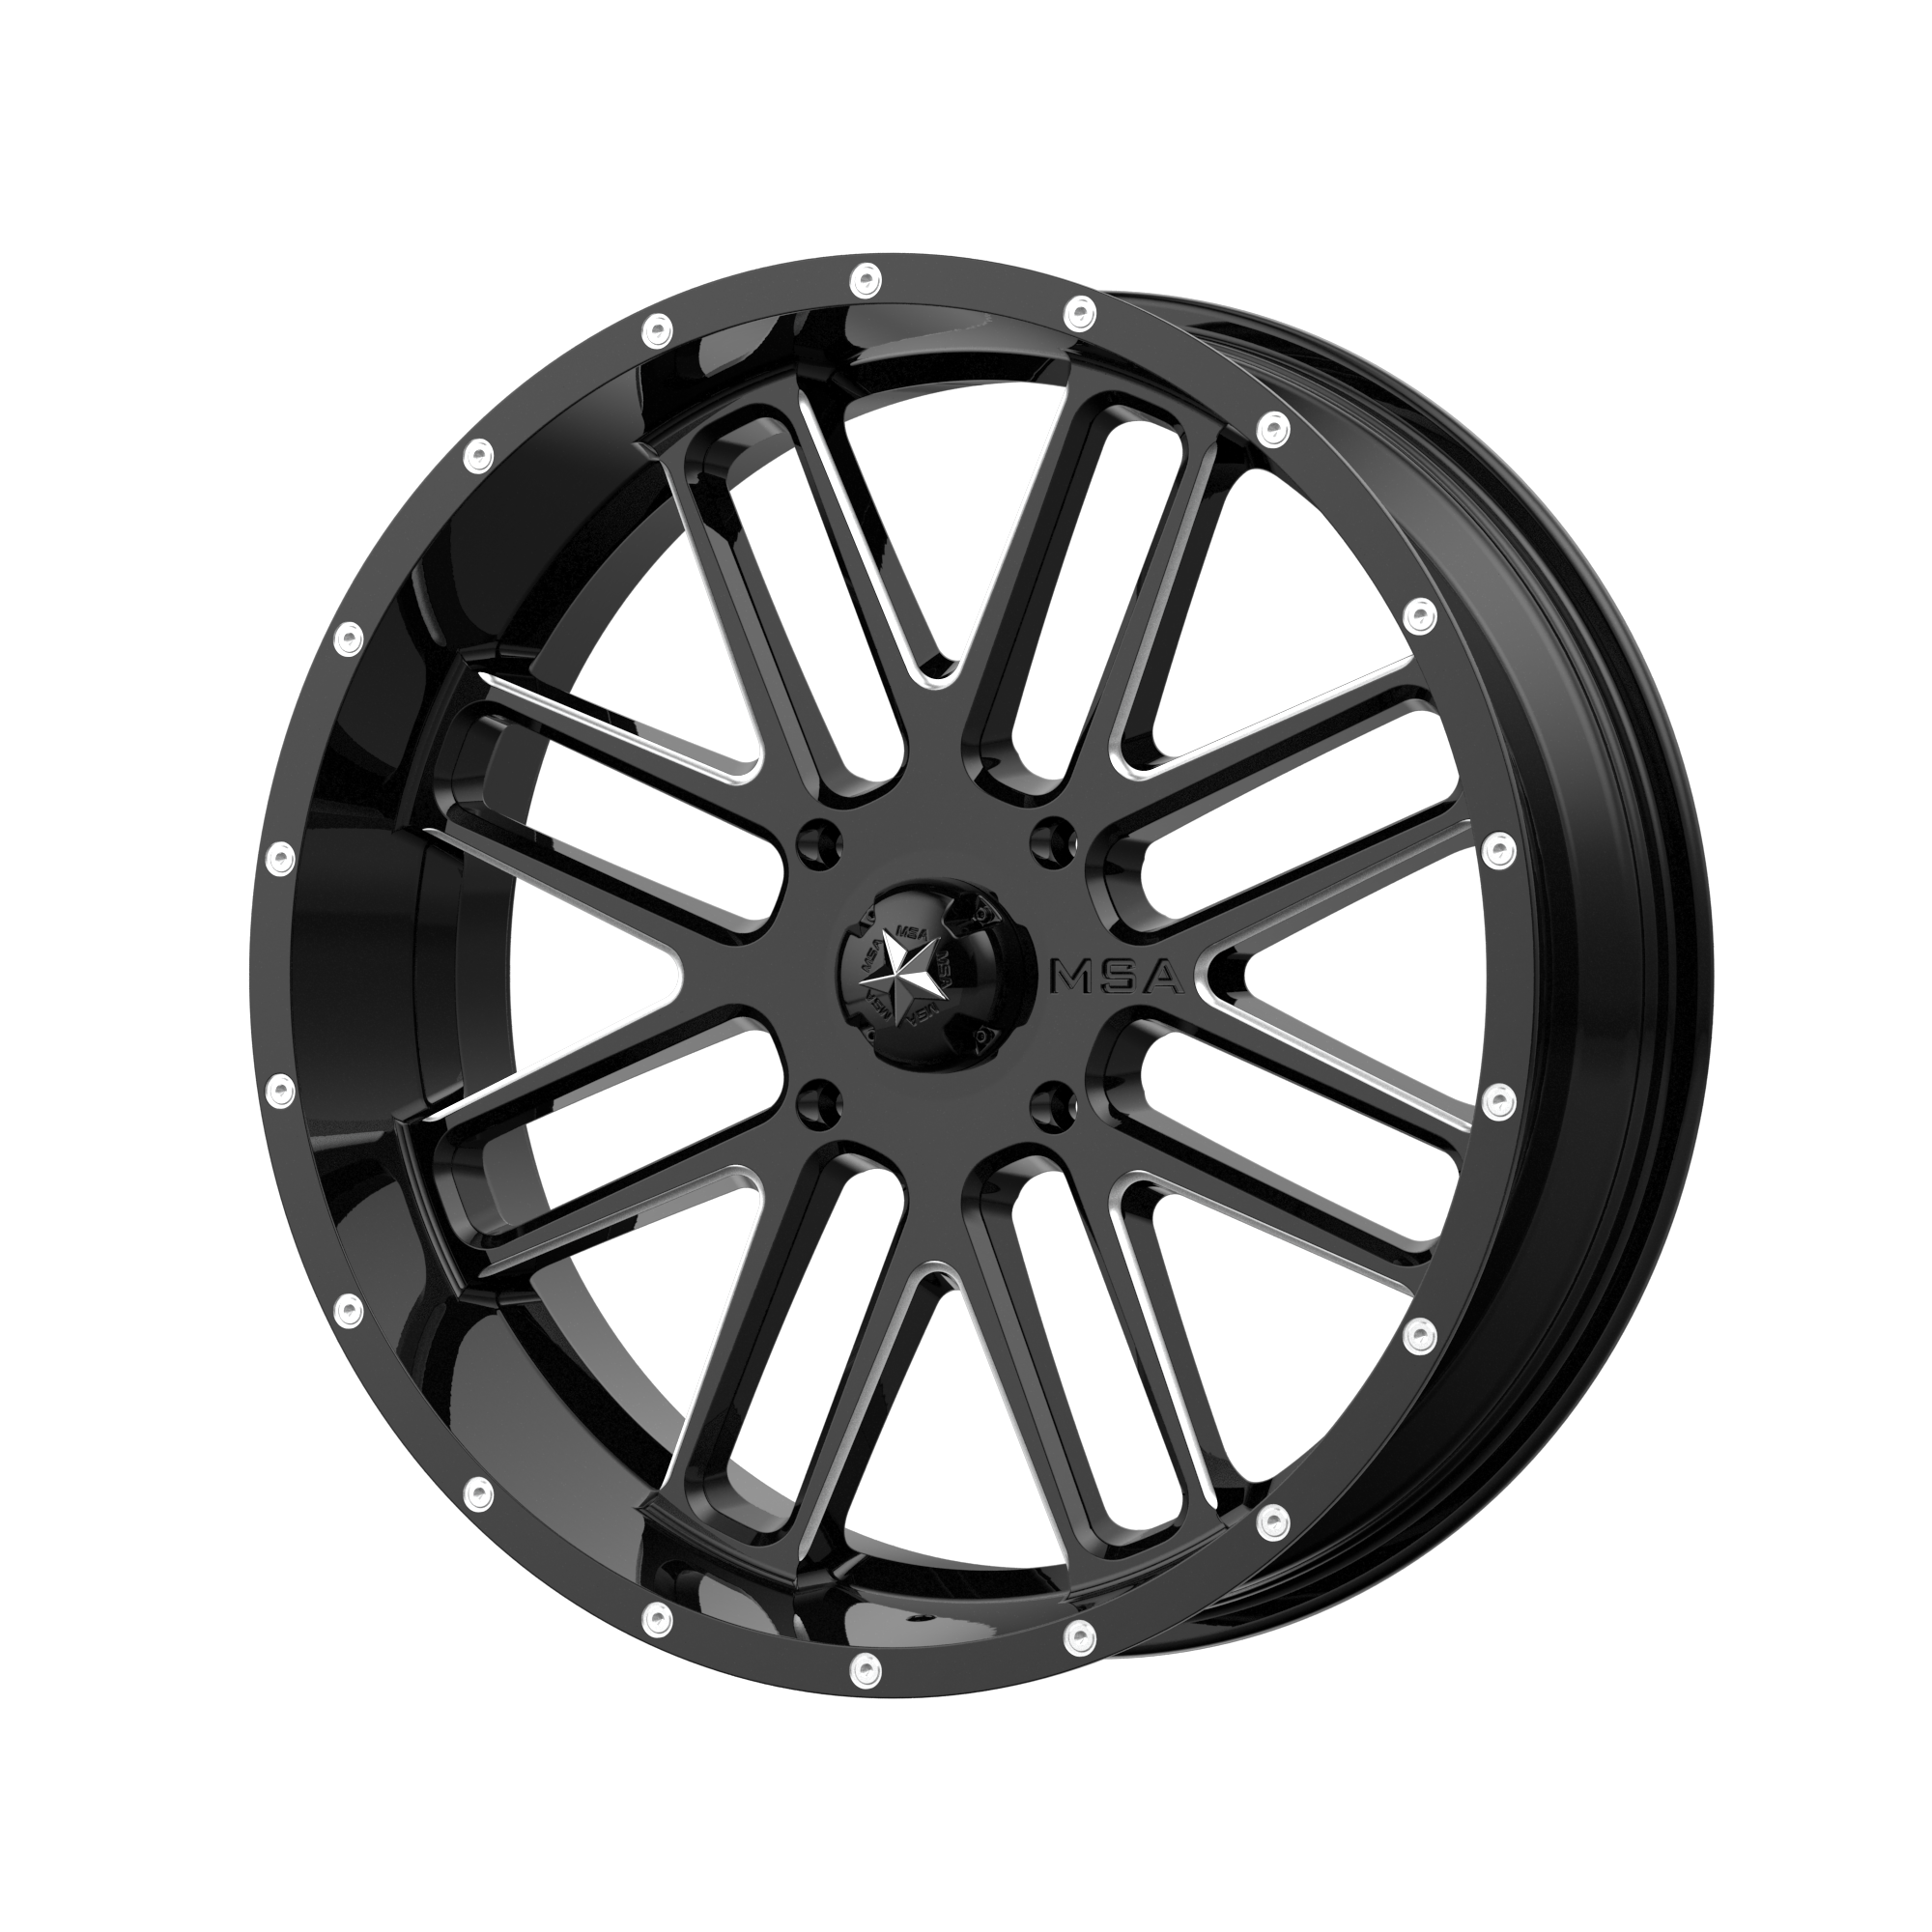 BANDIT 20x7 4x156.00 GLOSS BLACK MILLED (0 mm) - Tires and Engine Performance